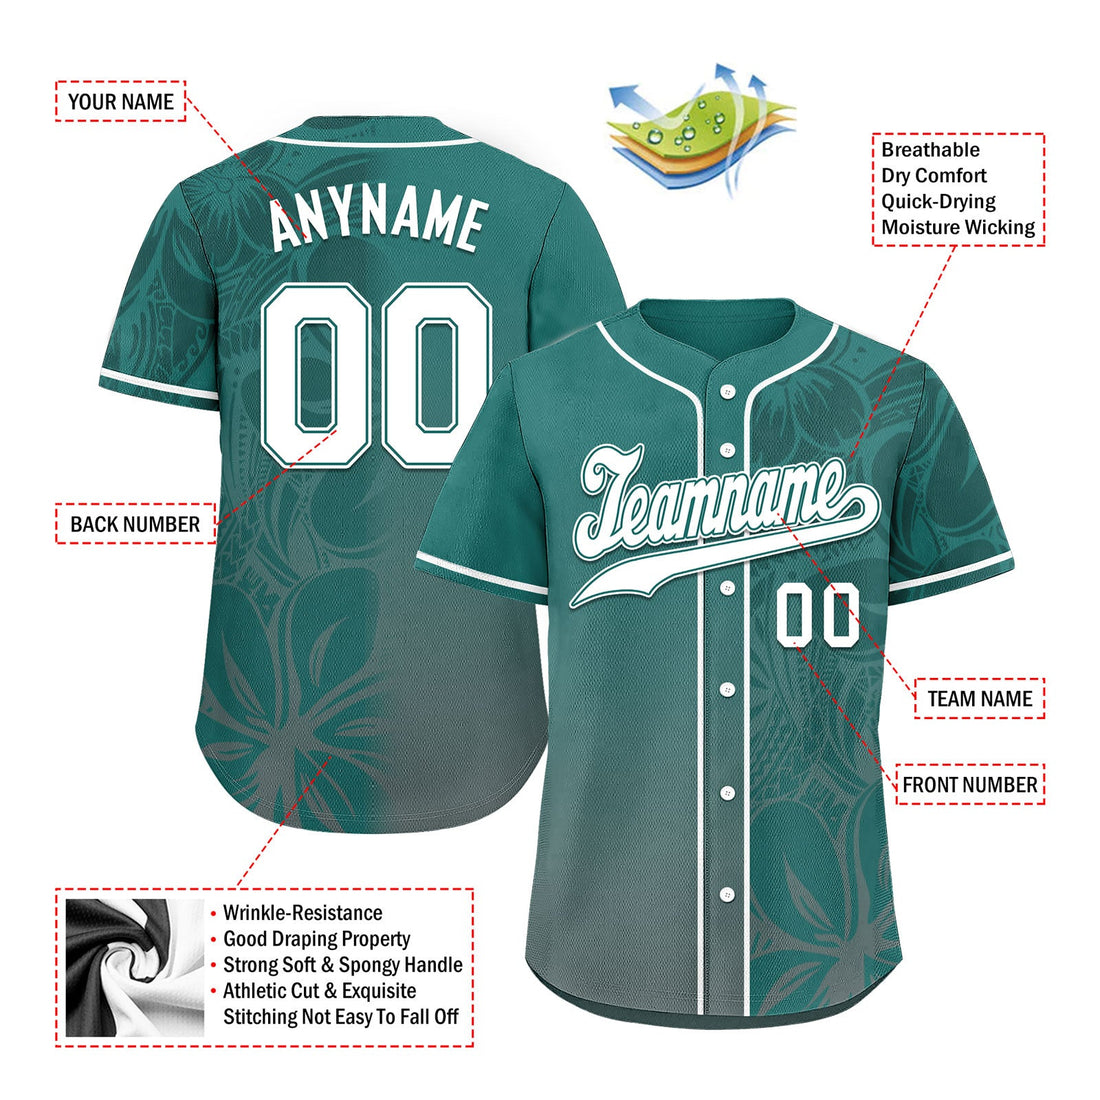 Custom Teal Classic Style Personalized Authentic Baseball Jersey BSBJ01-D020160-10